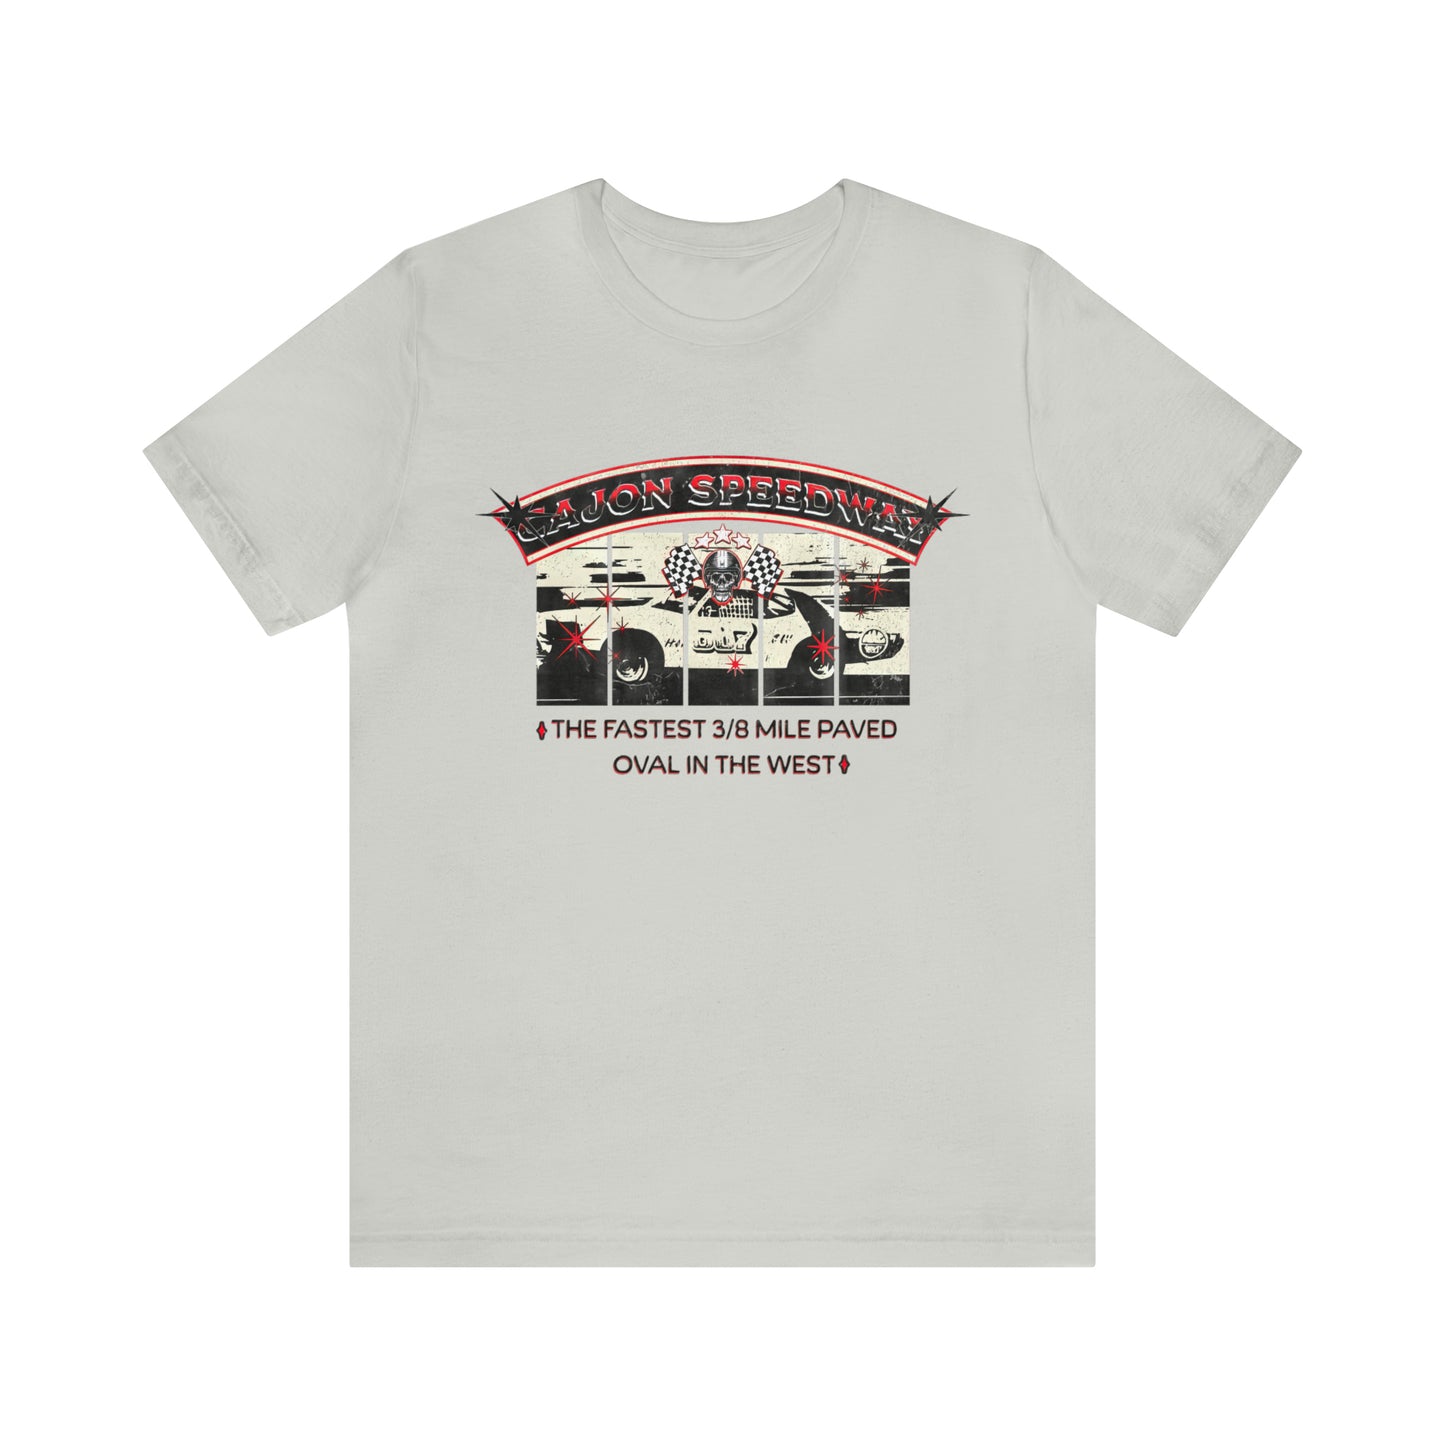 Cajon Speedway Fastest 3/8 Mile Paved Oval In The West - Retro Race Car T-Shirt